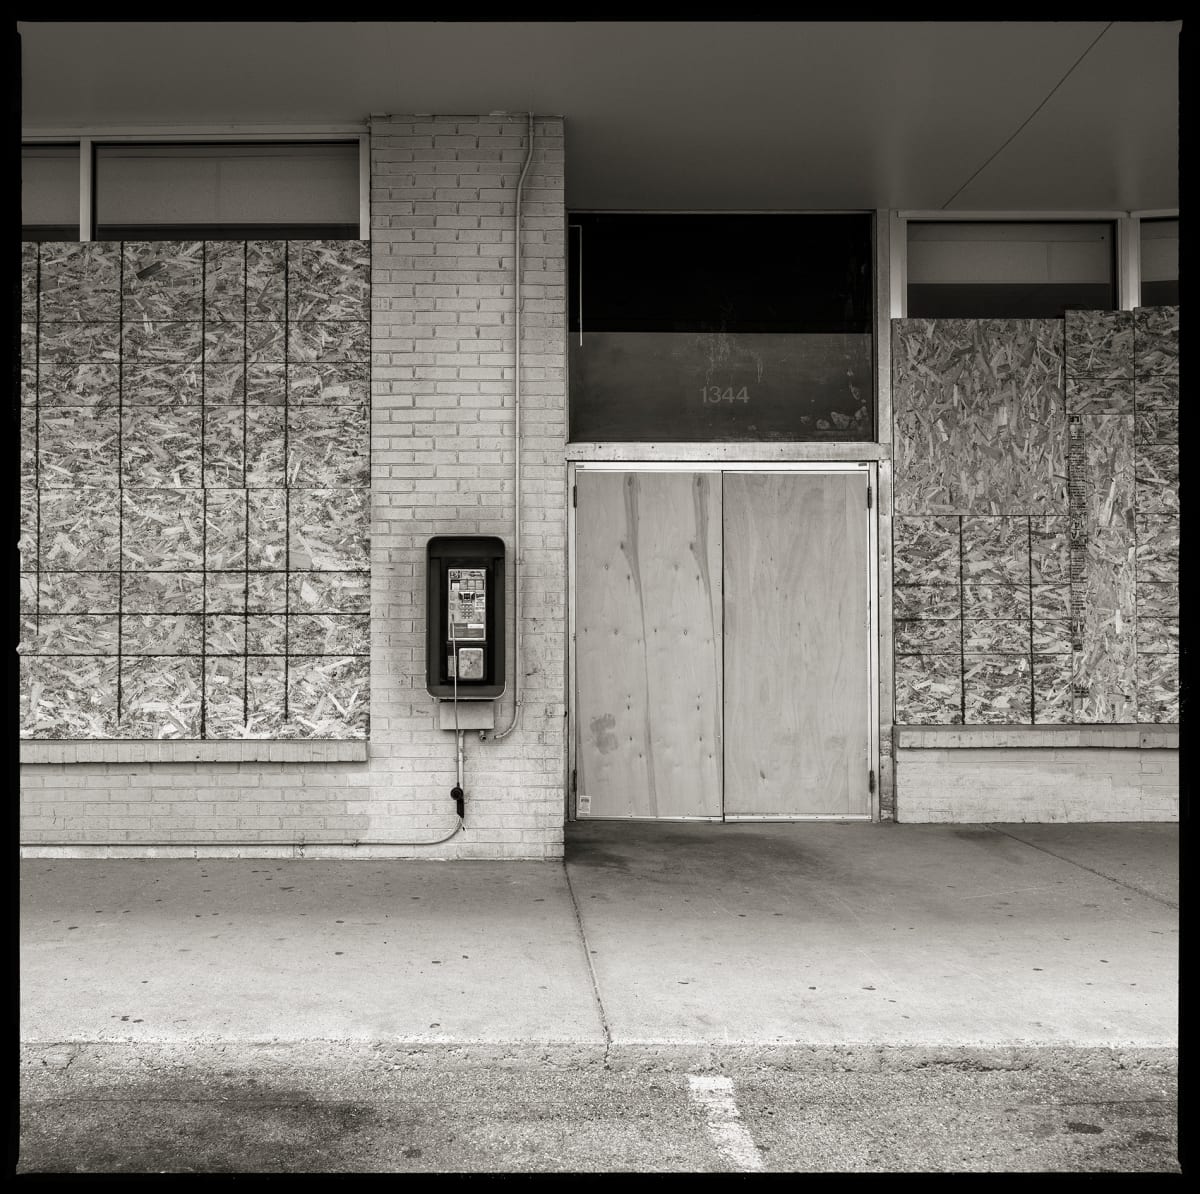 585.254.9782 – Family Dollar Store #1962, 1340 Lyell Avenue, Rochester, NY 14606 by Eric T. Kunsman  Image: ID: A black and white image shows a boarded up building with a payphone mounted a the brick pillar.